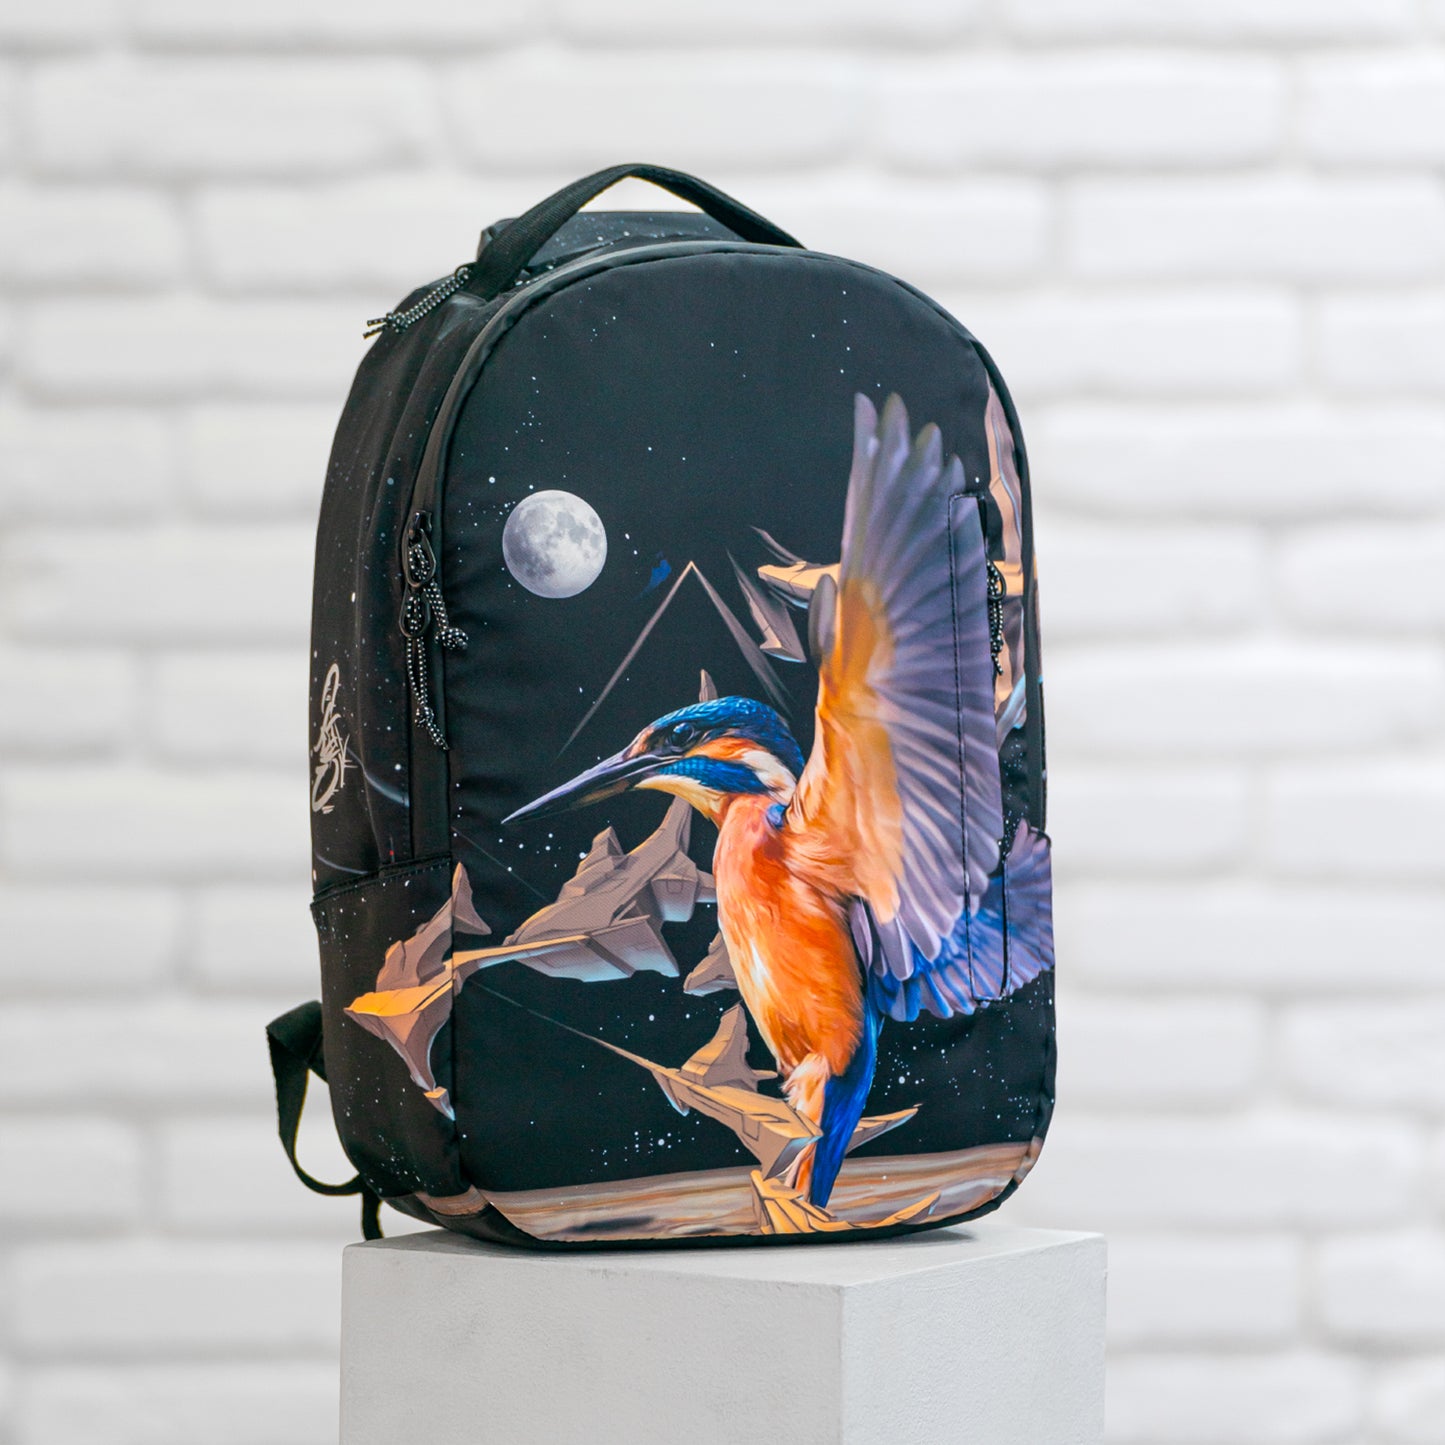 Rucksack eARTh Kingfisher by Caer8th